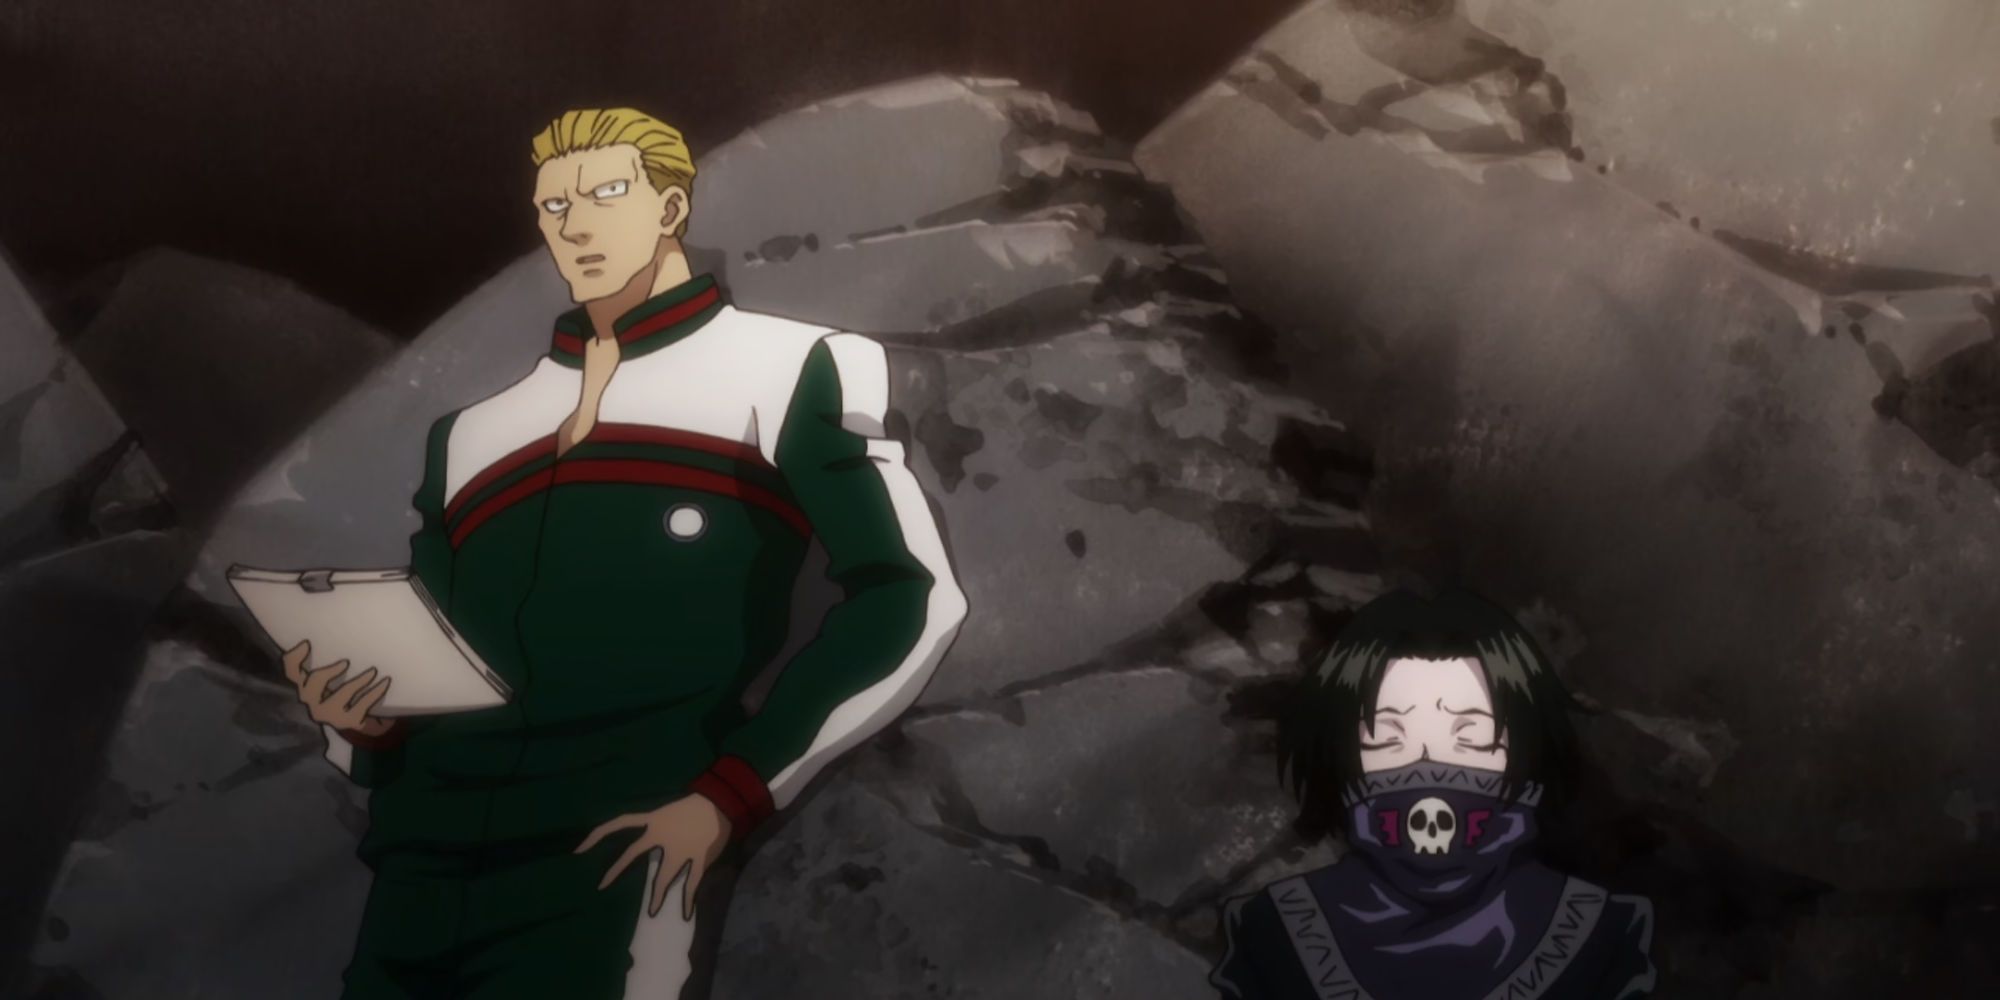 Phinks and Feitan conversing with the Phantom Troupe in Hunter x Hunter